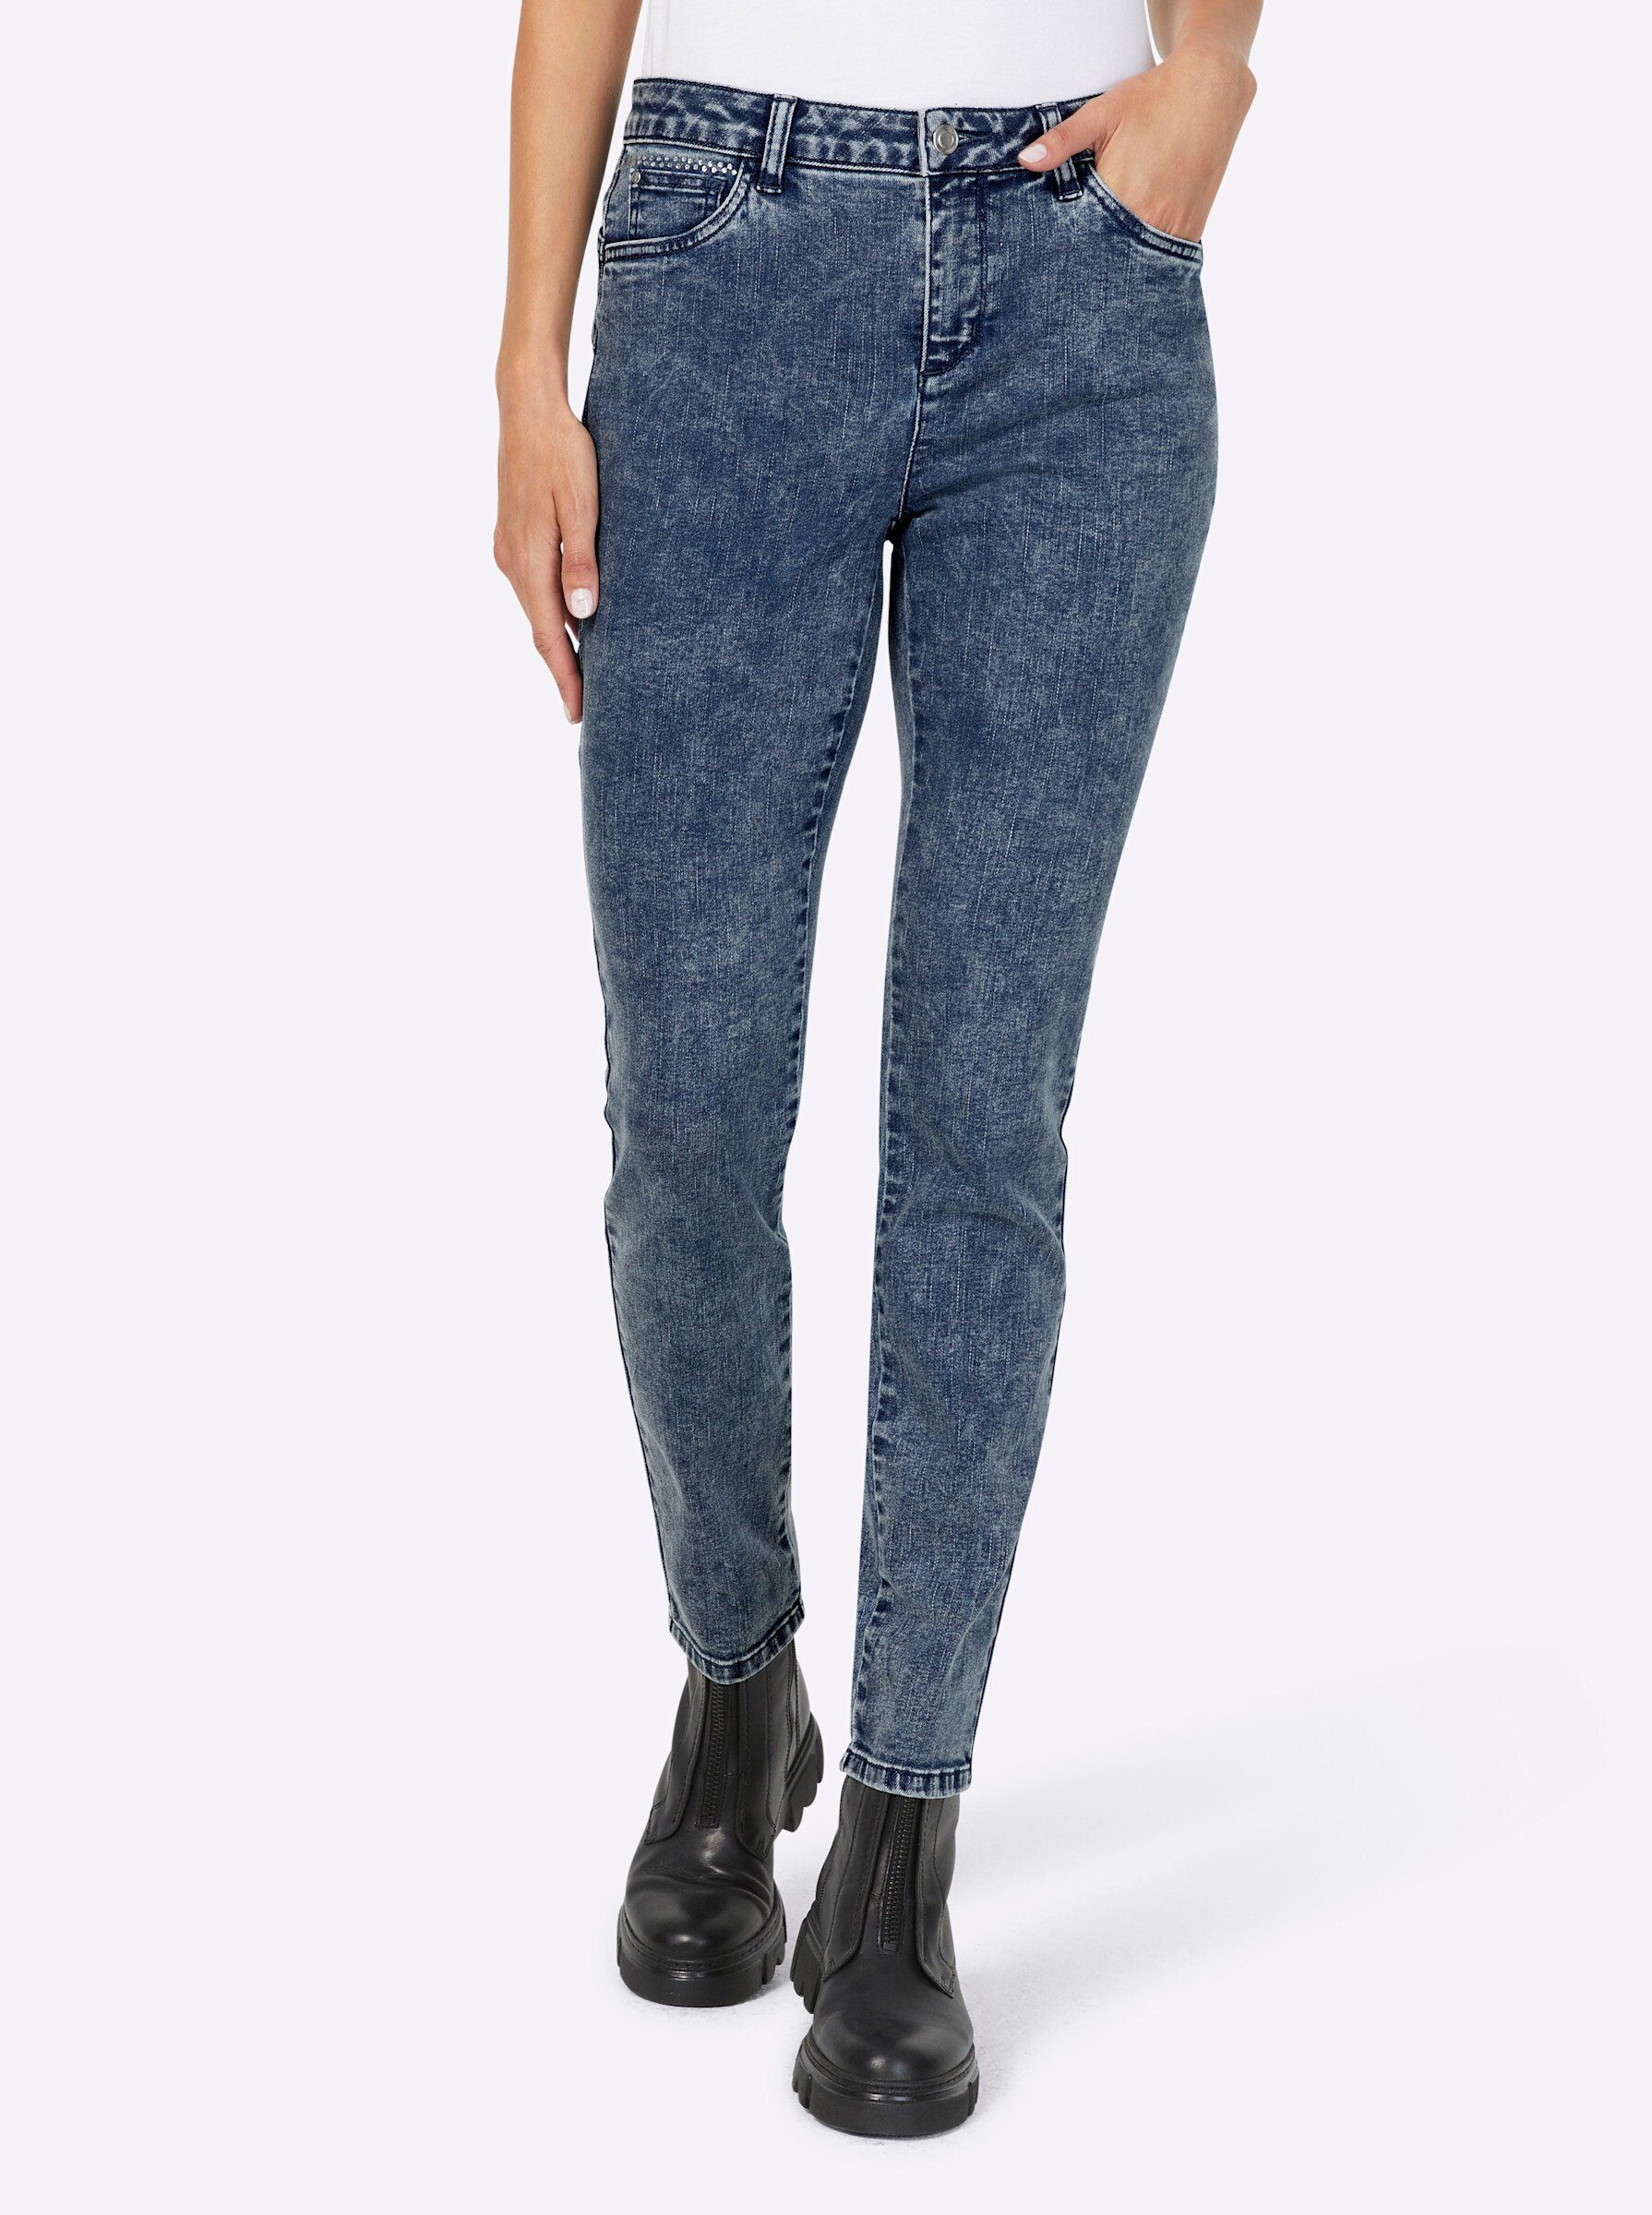 Jeans Bequeme heine blue-stone-washed